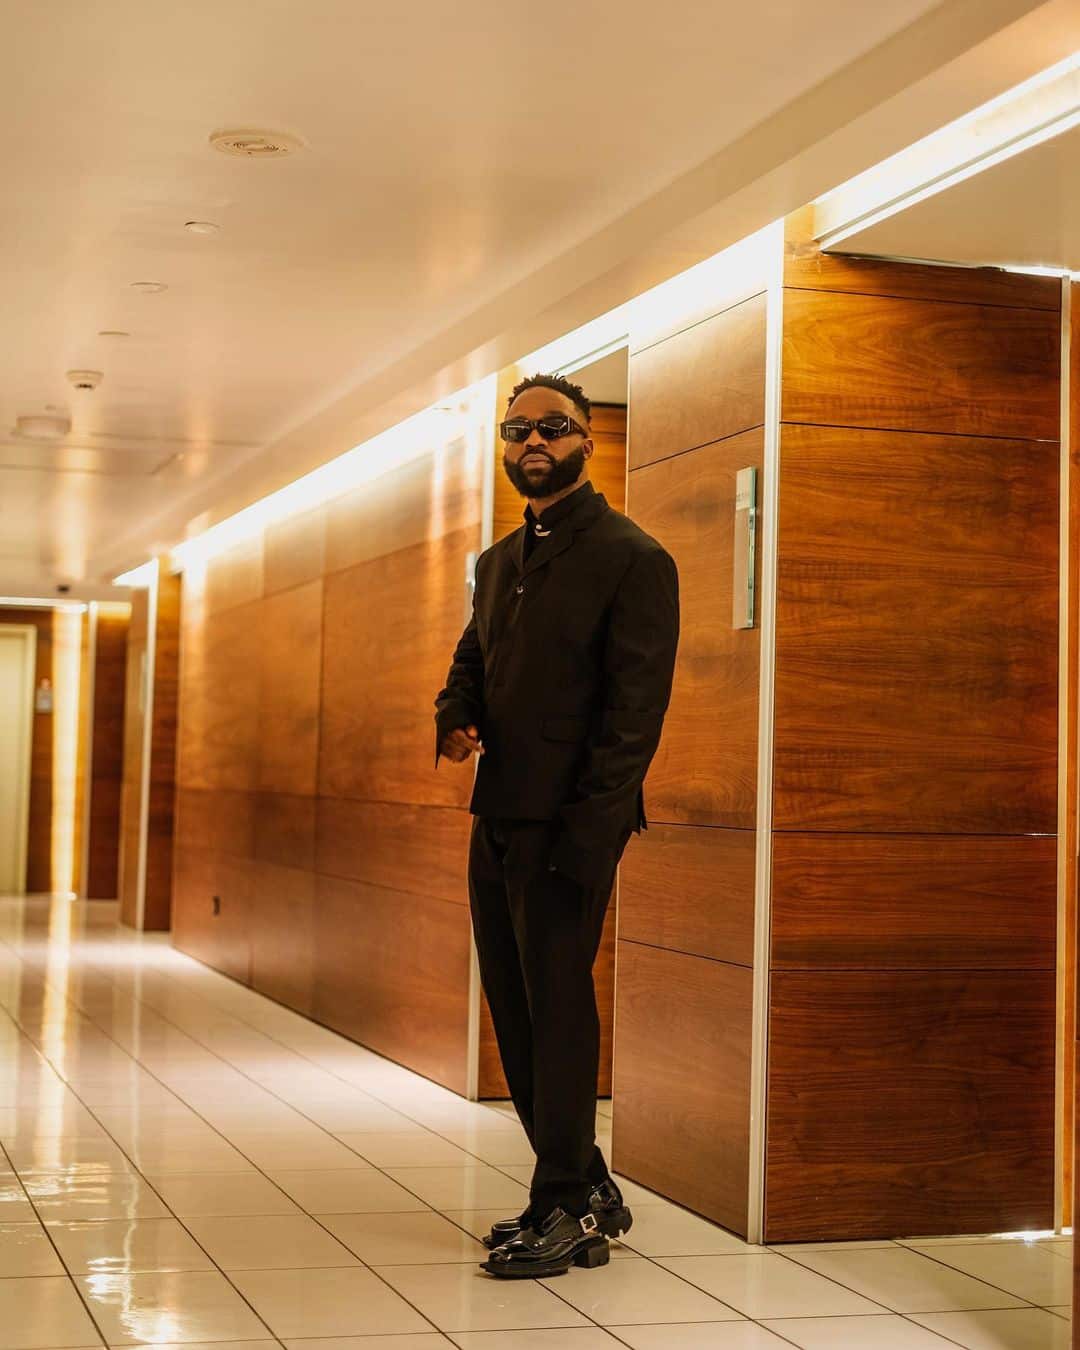 I lost thousands of followers and received threats after Yvonne Nelson claimed I cheated on her – Iyanya